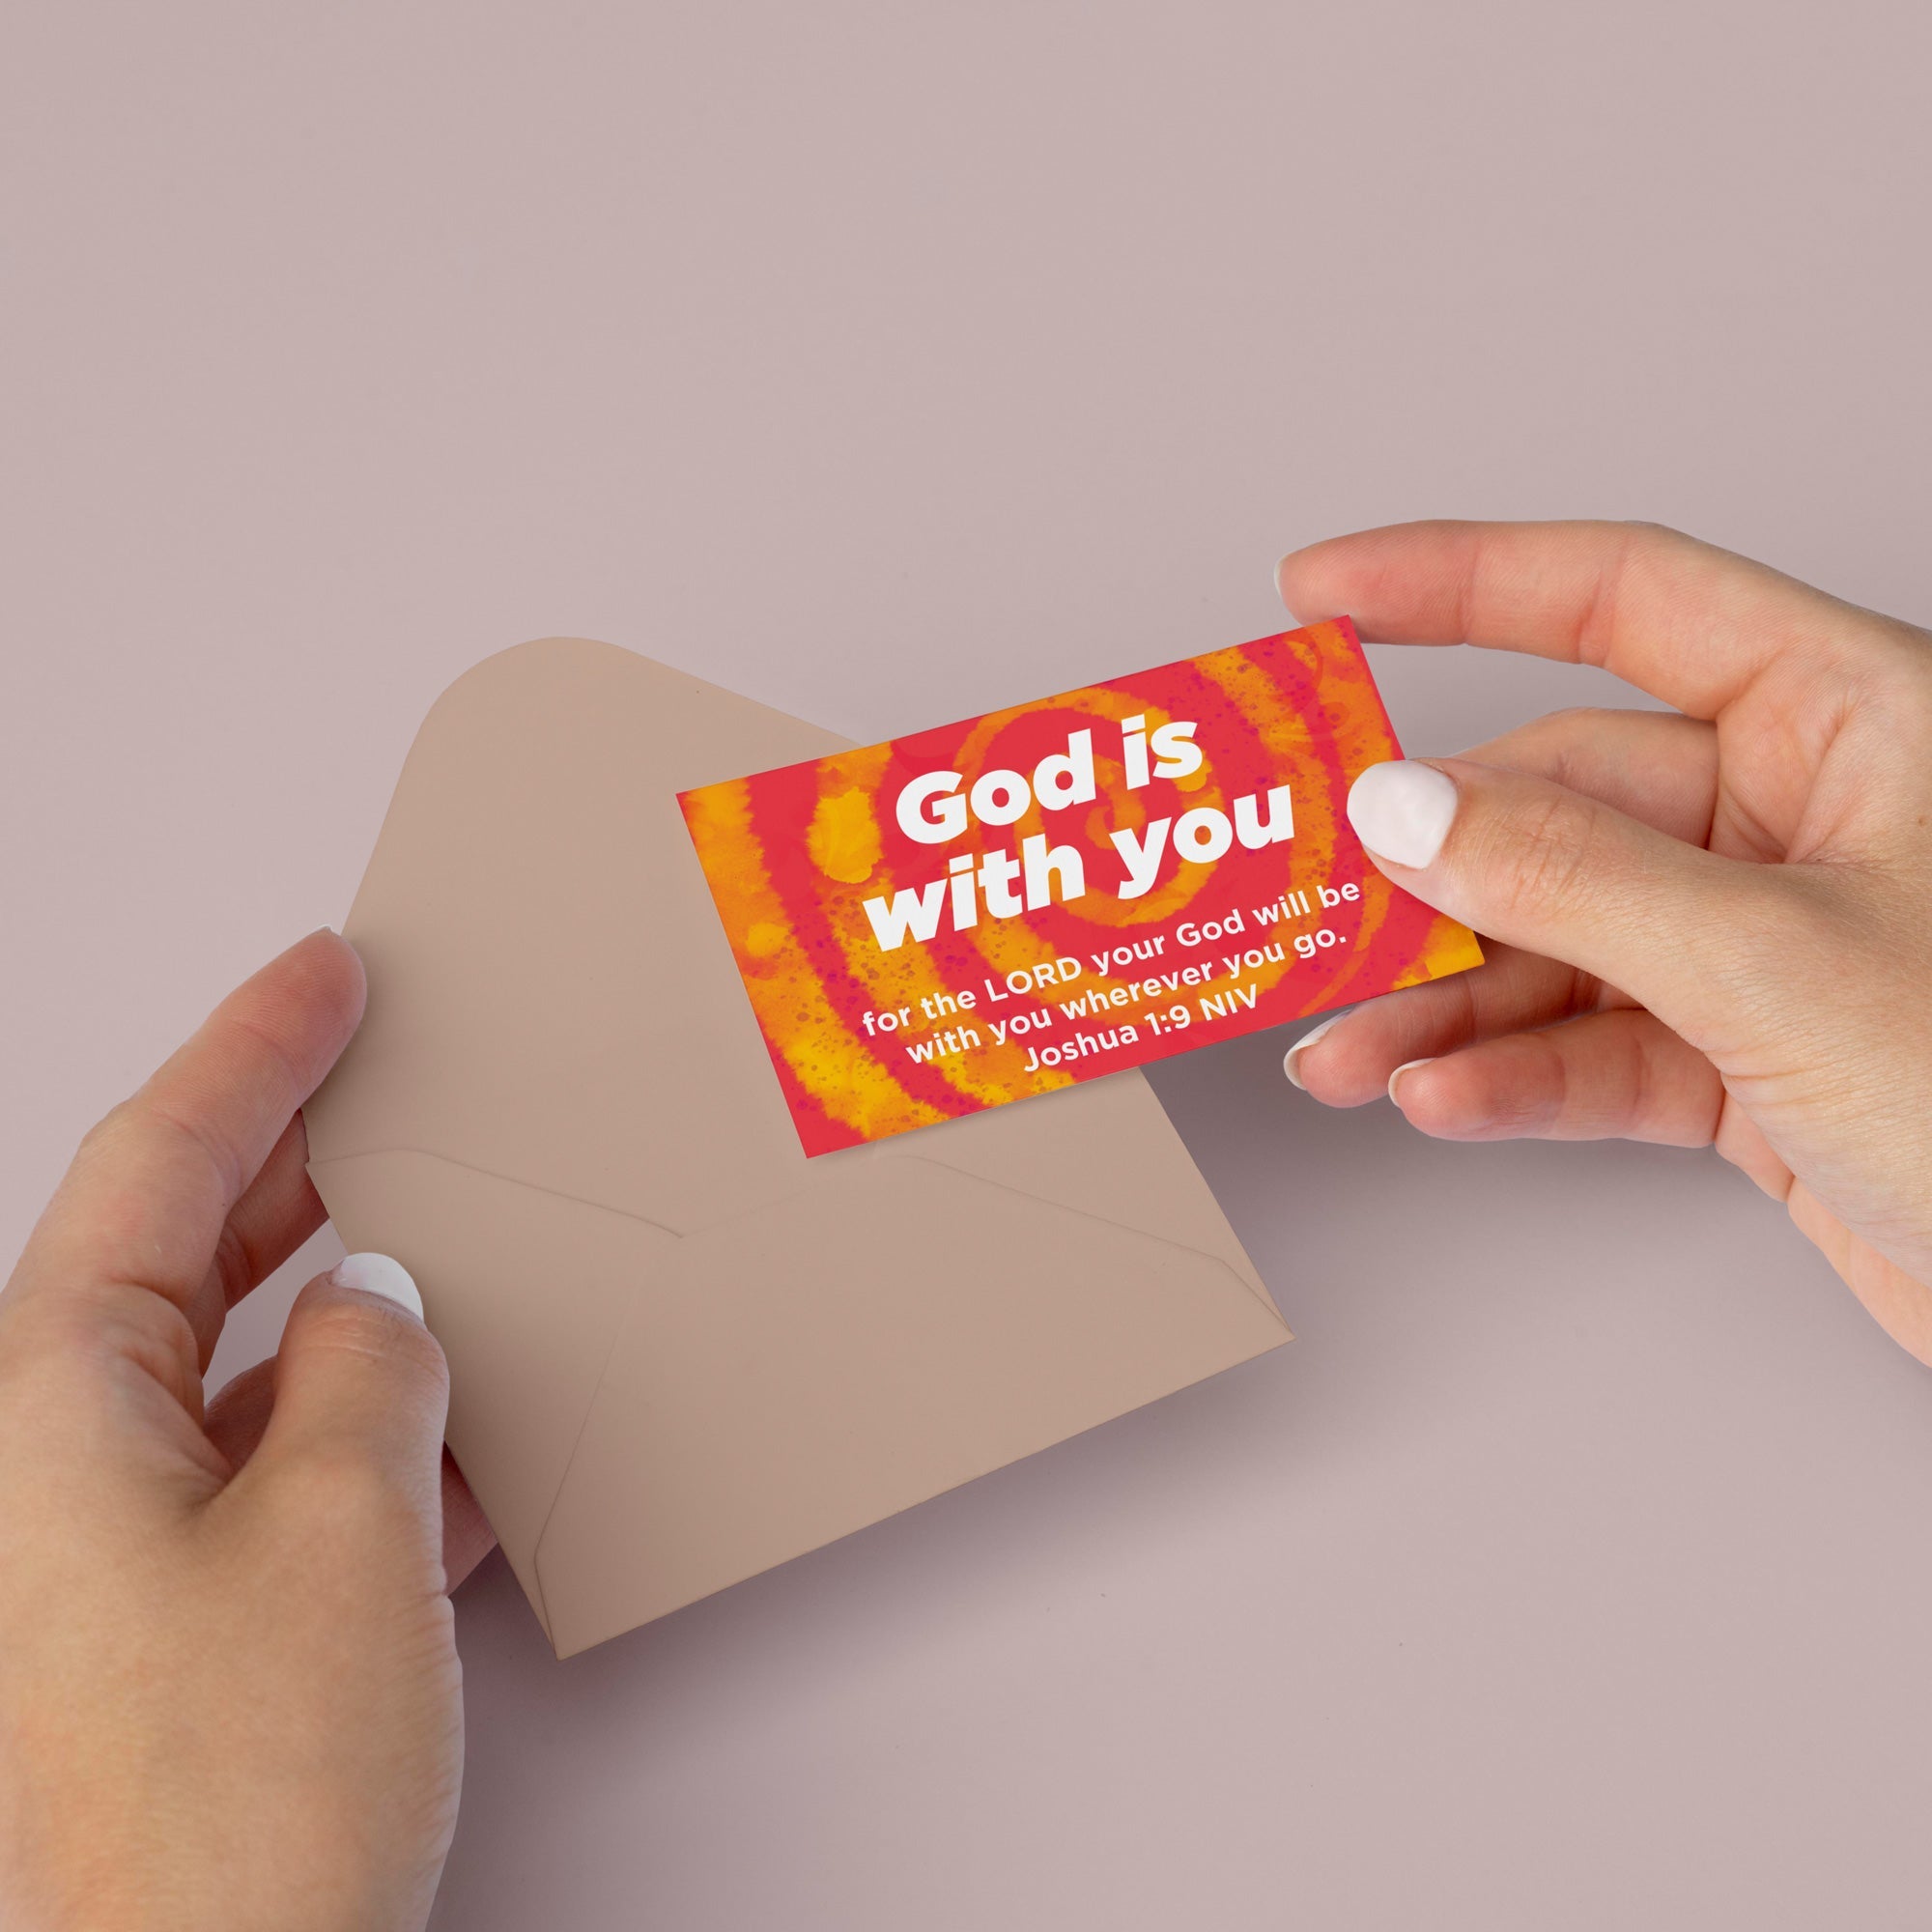 Children and Youth, Pass Along Scripture Cards, God is With You, Joshua 1:9, Pack of 25